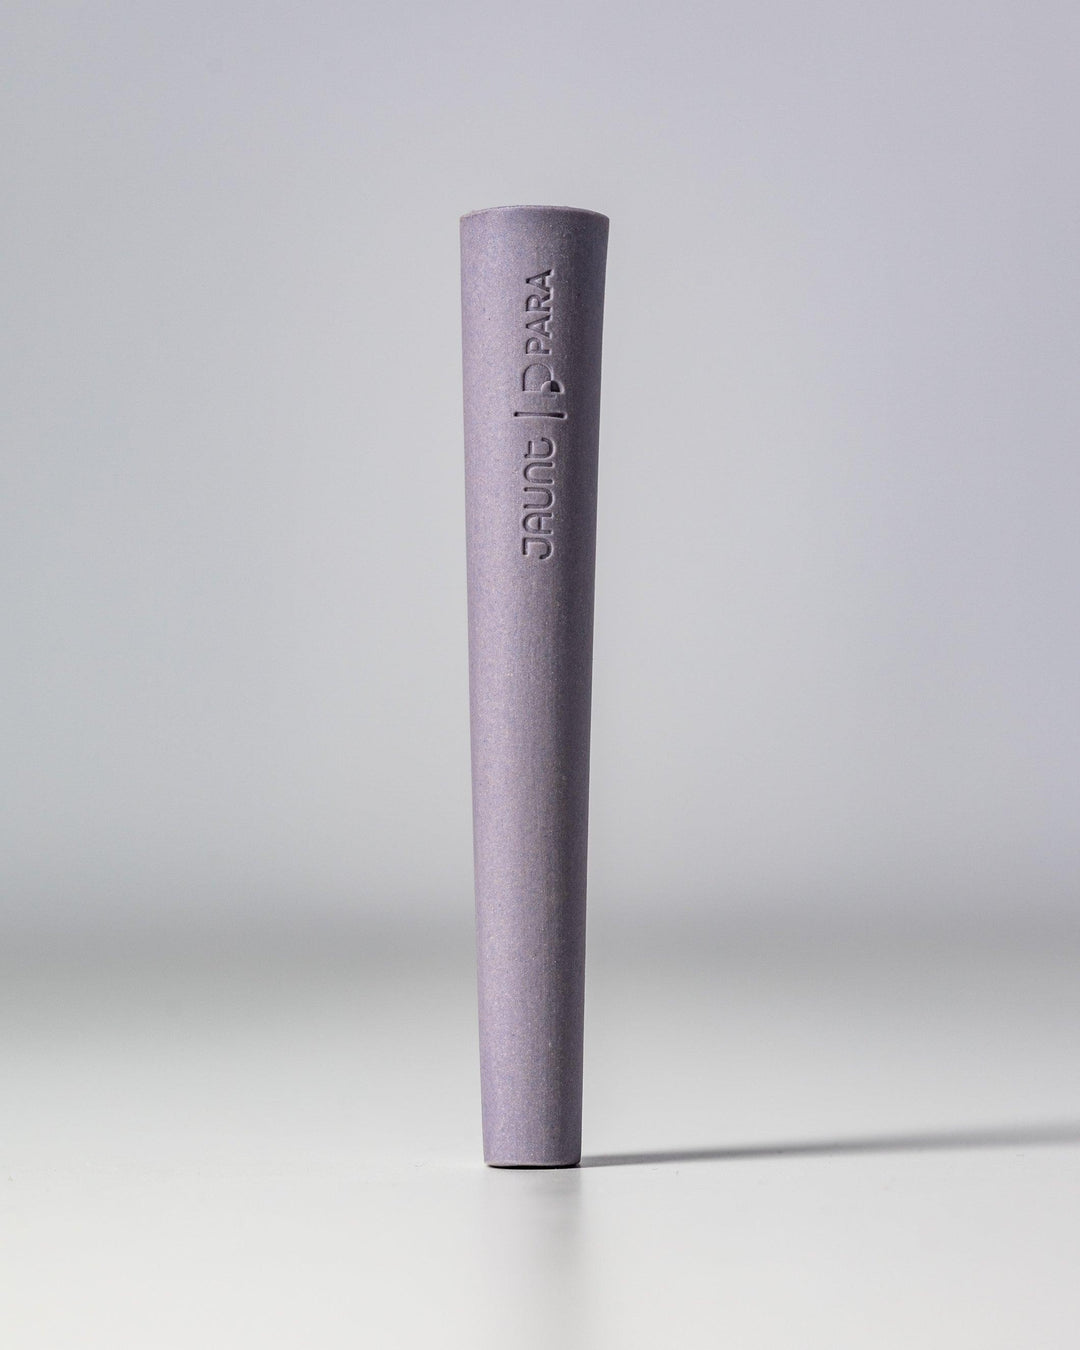 Lavender ceramic one-hitter weed pipe.